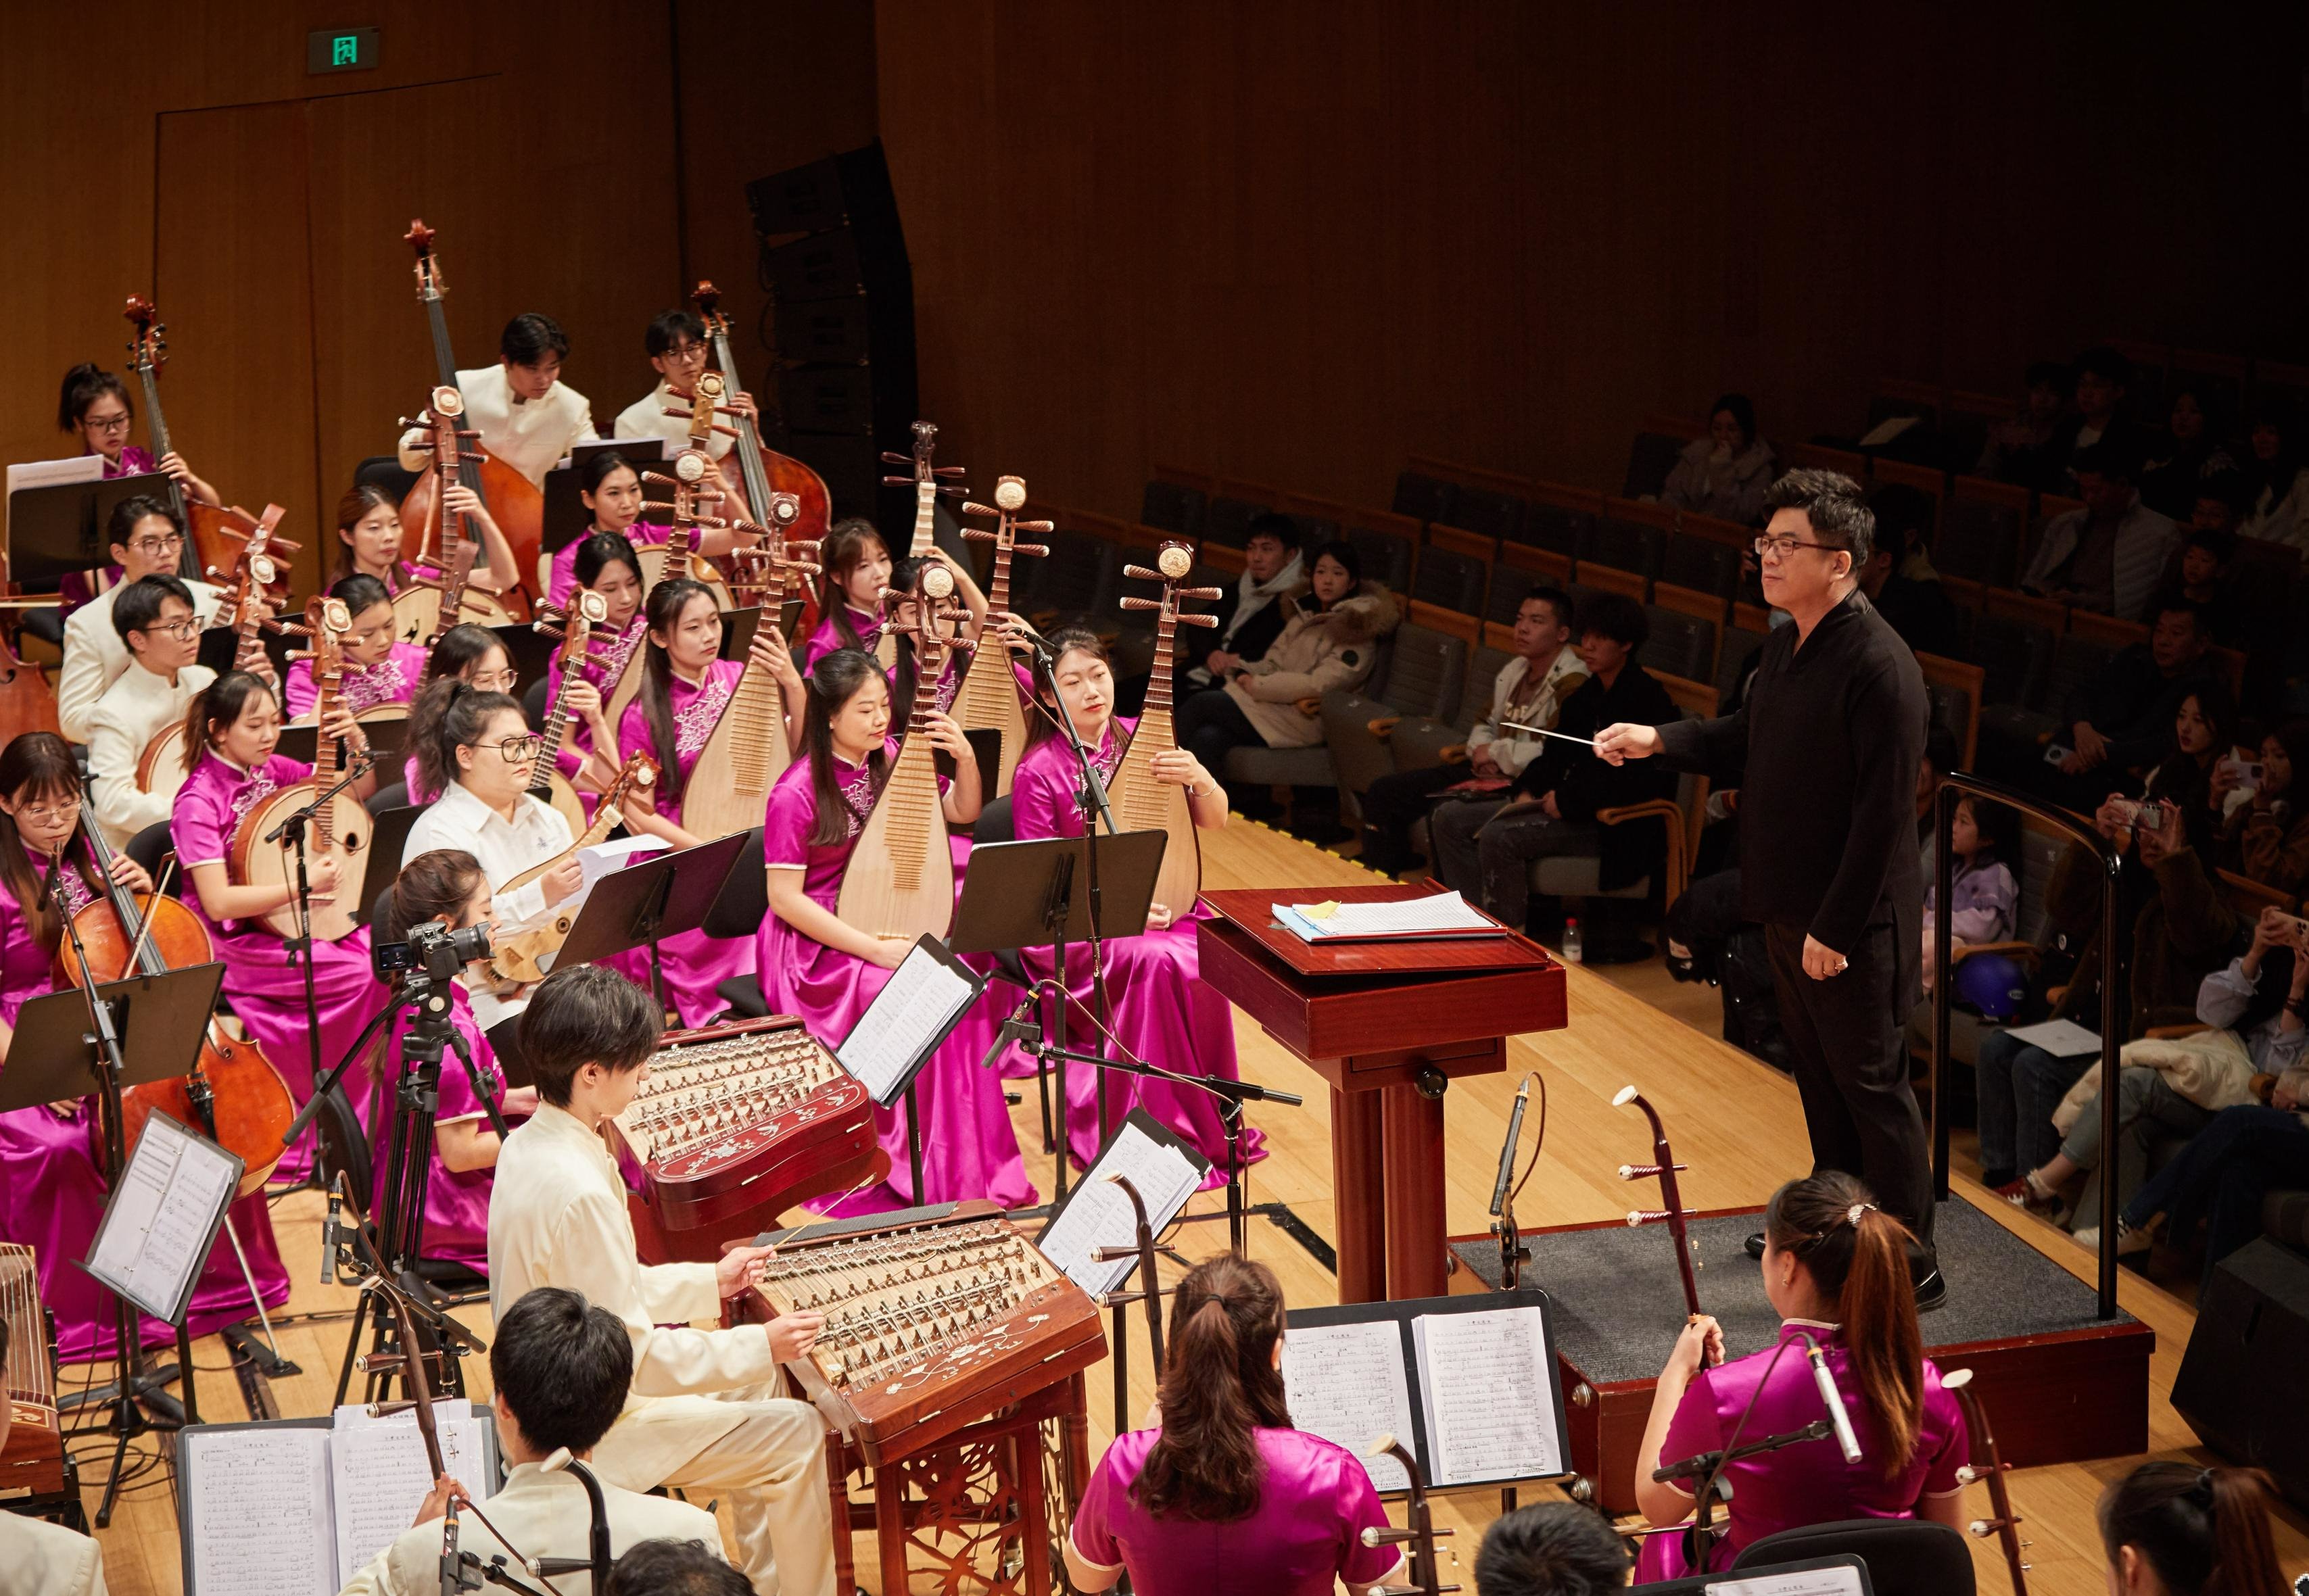 Shandong University concert highlights traditional Chinese music